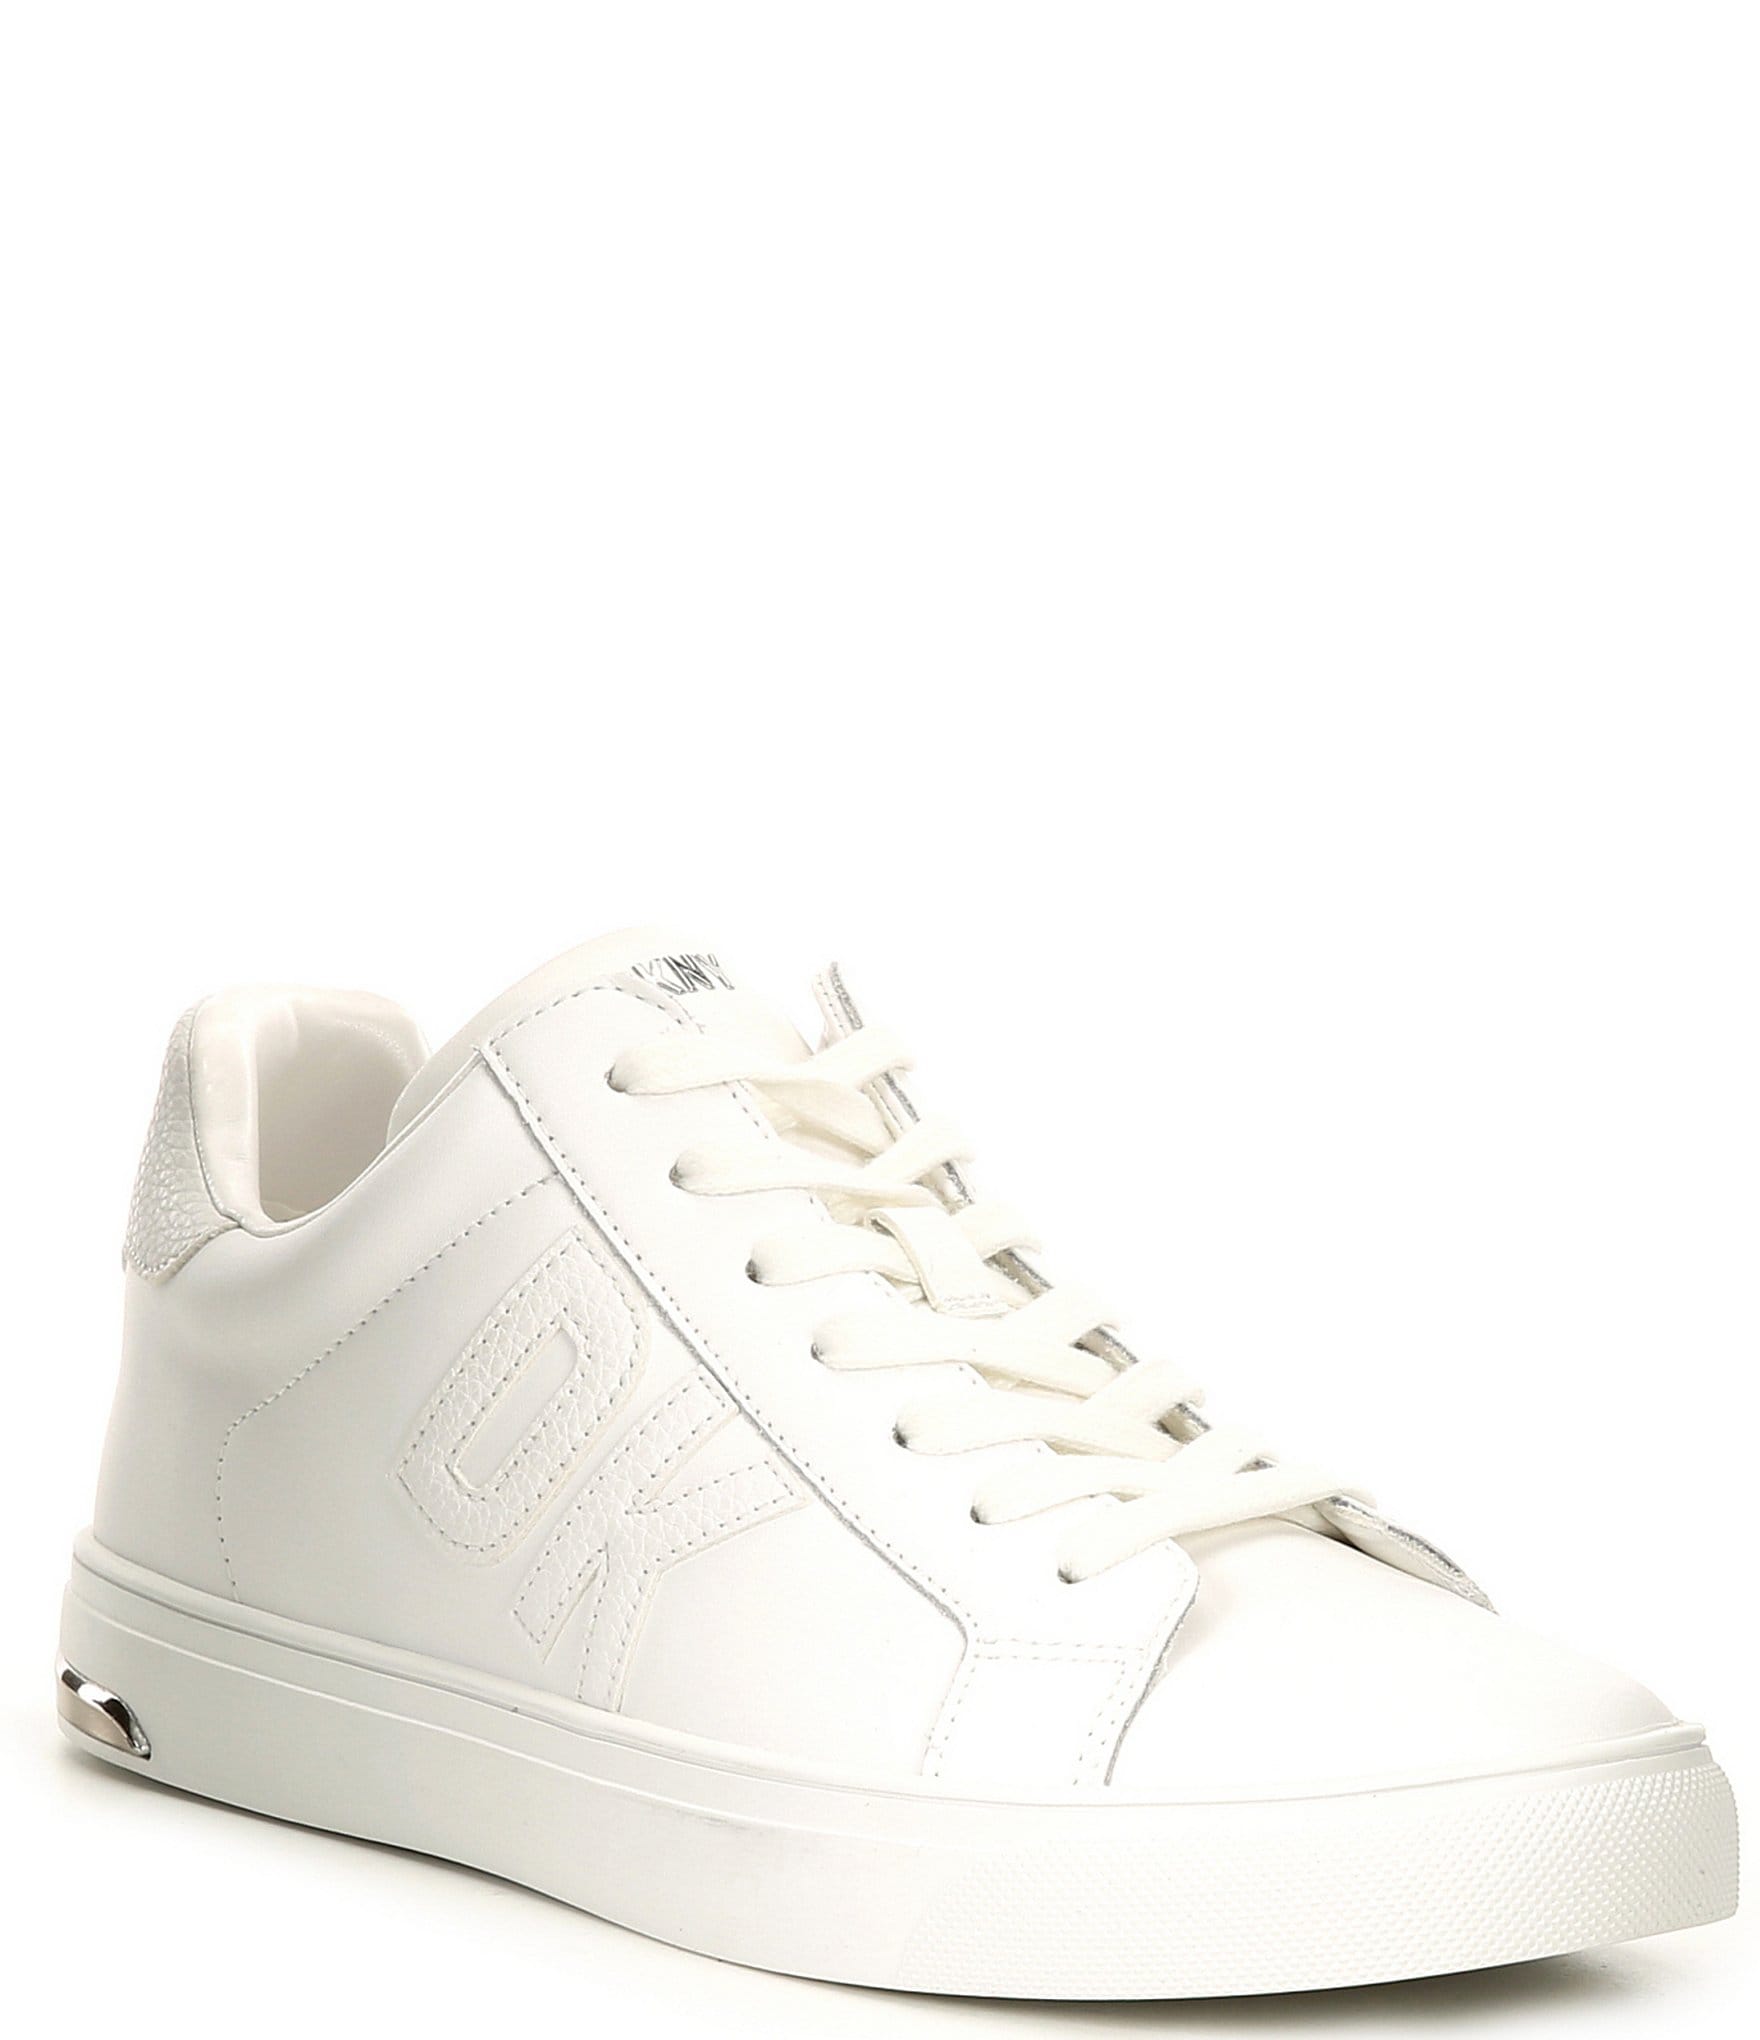 DKNY Abeni Lace-Up Leather Sneakers | Dillard's